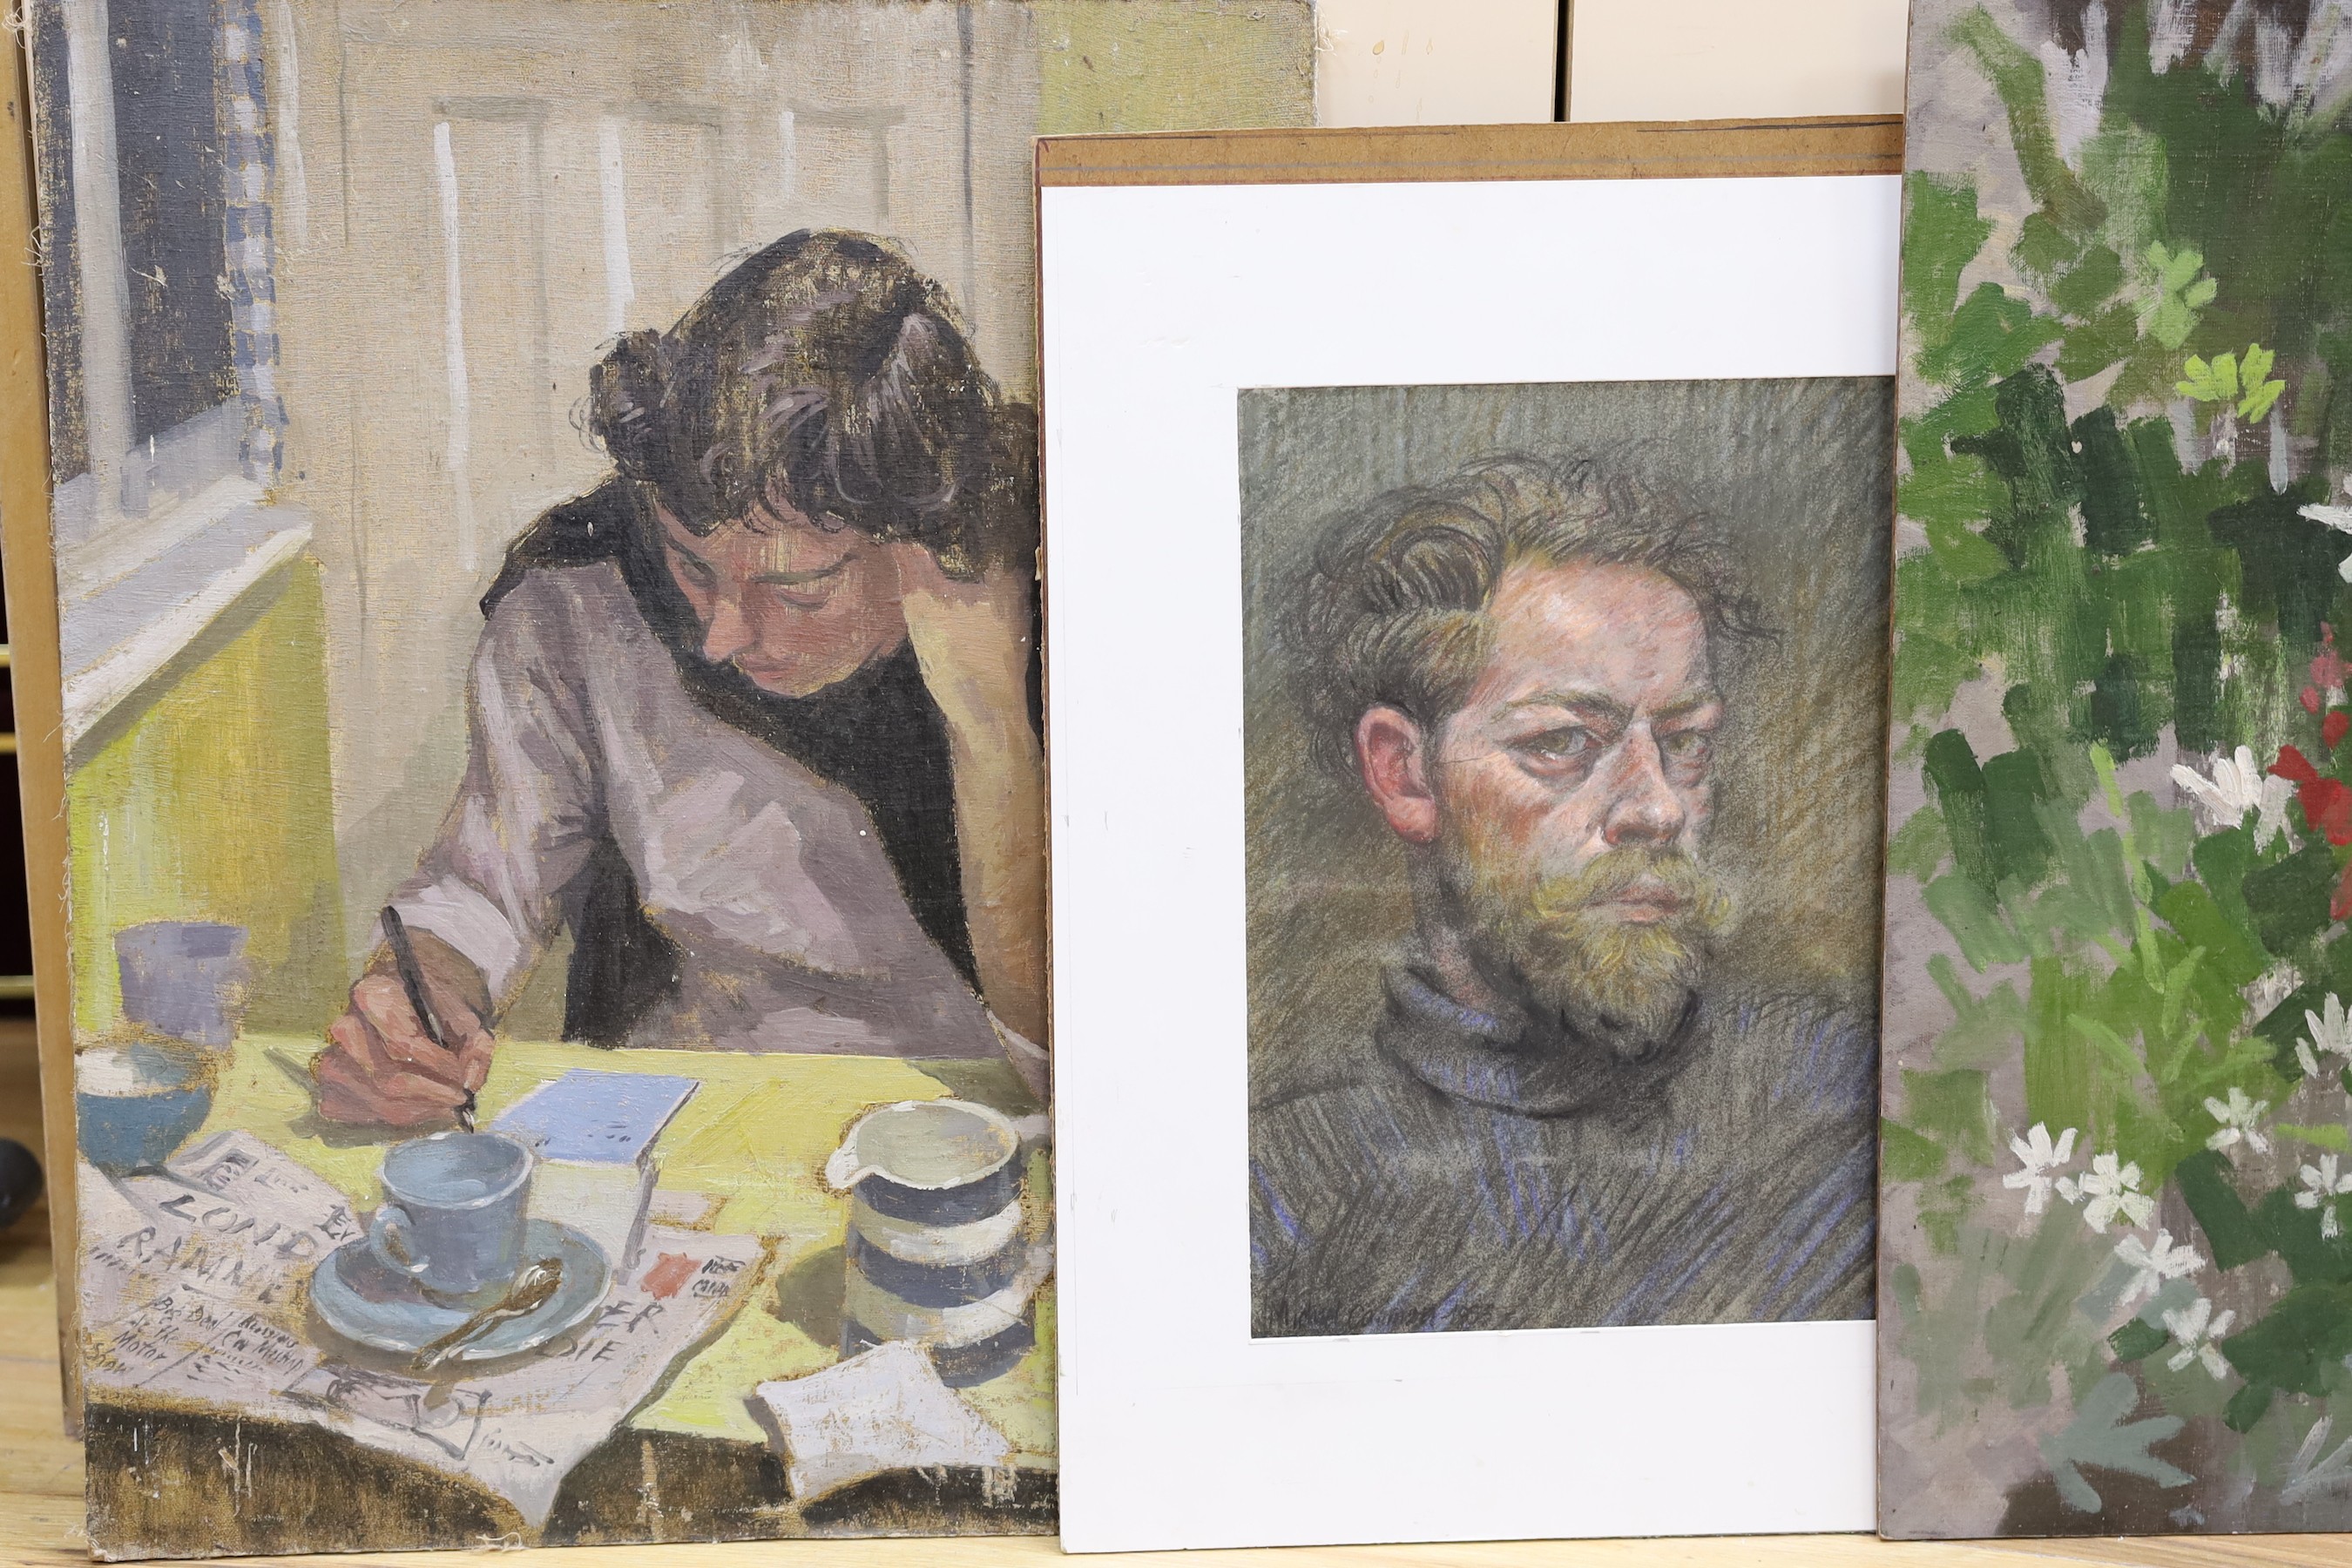 Michael Lawrence Cadman (1920-2010), five oils on board, Landscapes and figure studies, unfinished sketches, together with two watercolours and a pastel portrait, largest 51 x 41cm, mostly unframed